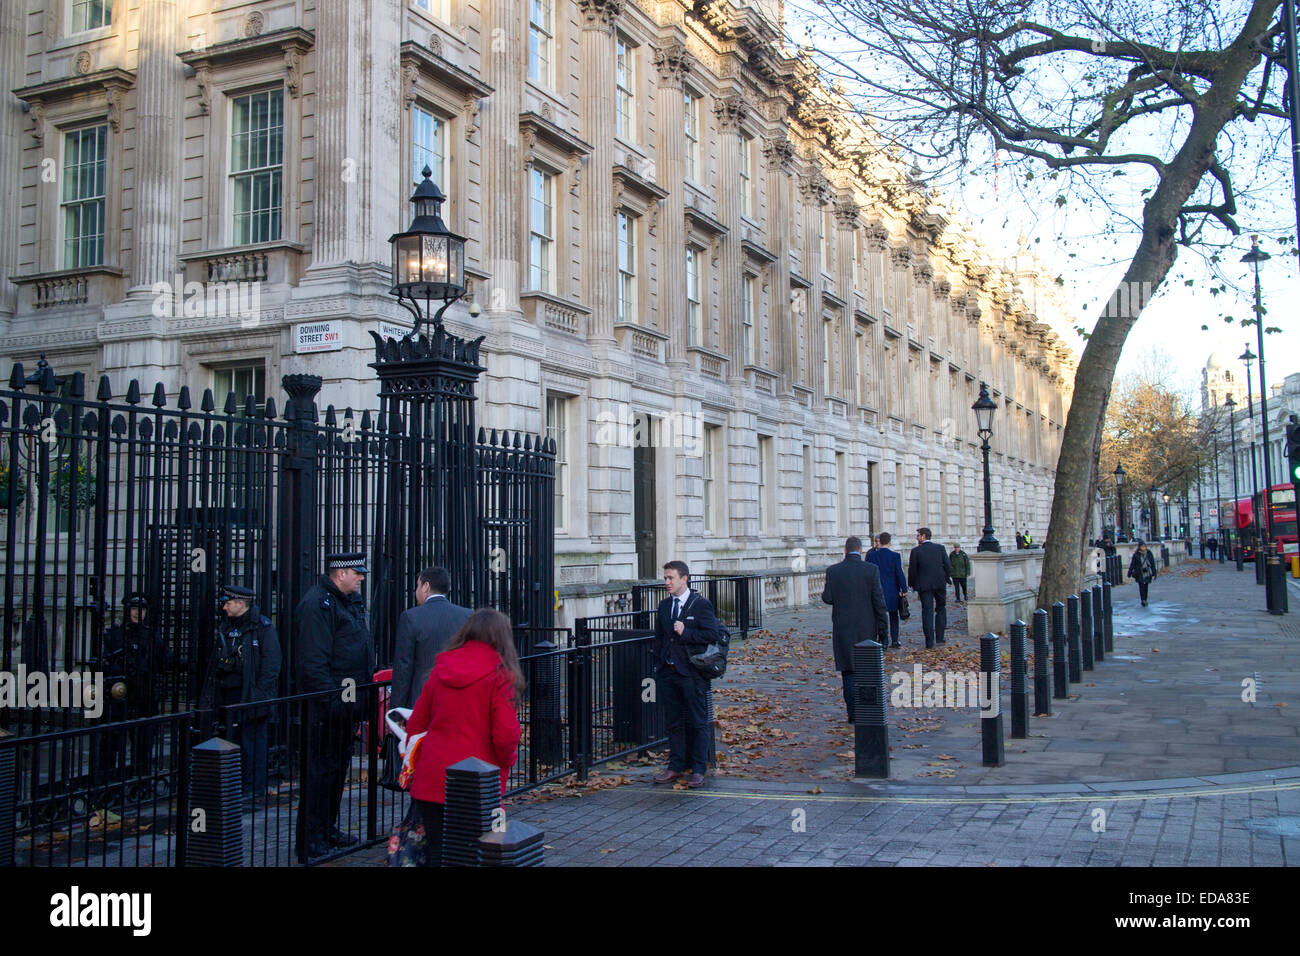 The corner of Downing Street and Whitehall gates in central London, England UK residence of Prime Minister of the United Kingdom Stock Photo